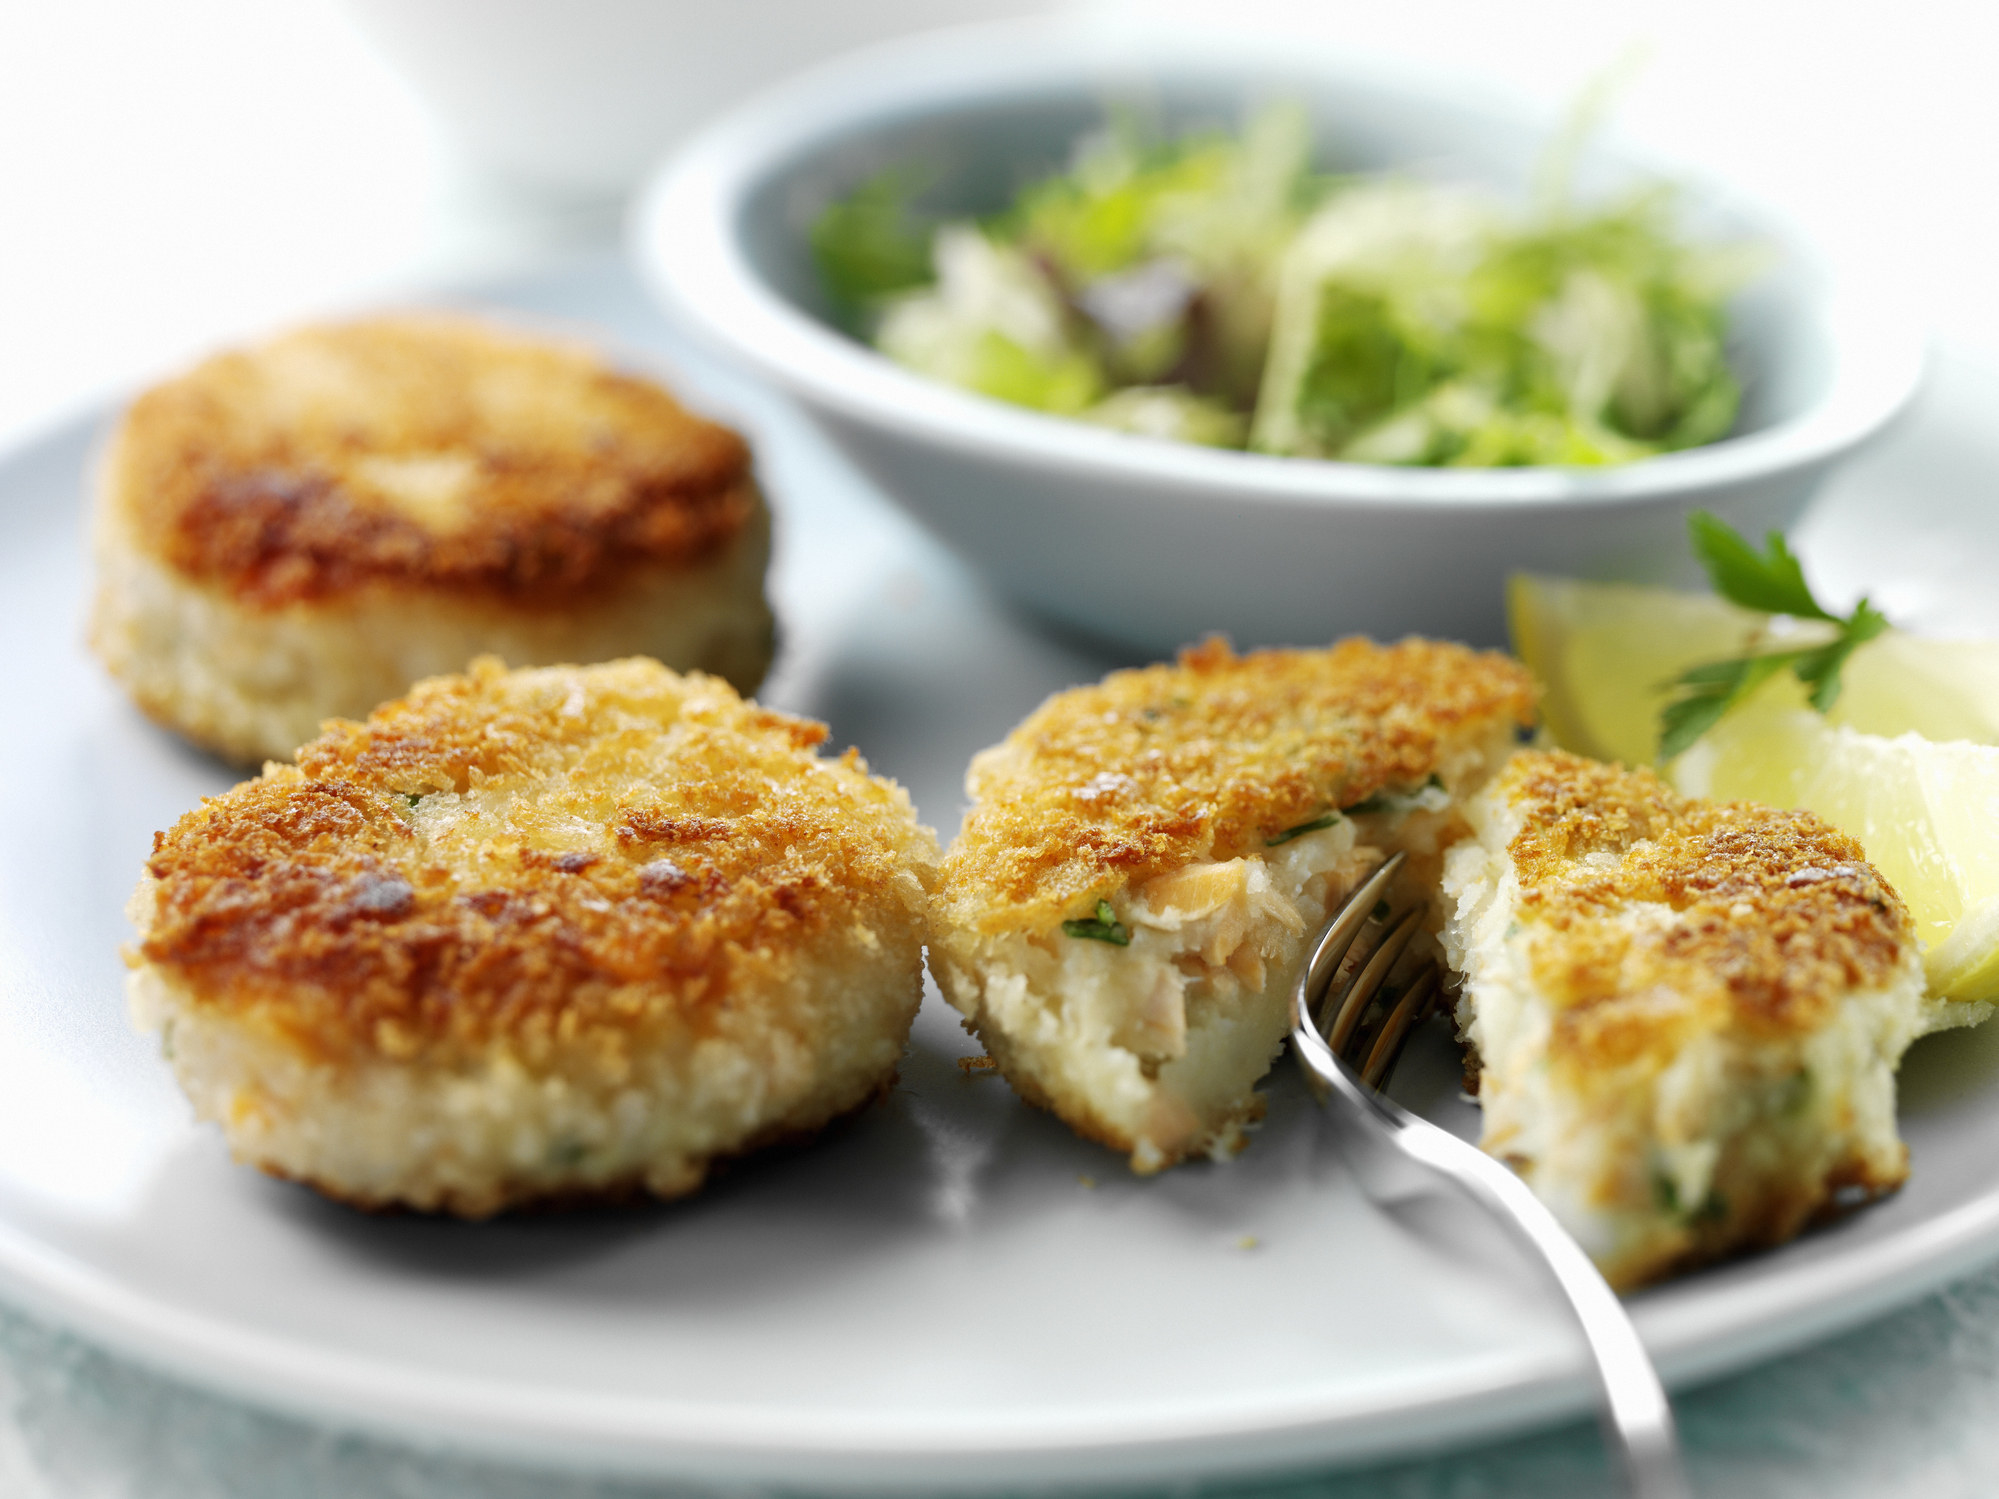 Fish cakes on a plate with a side salad